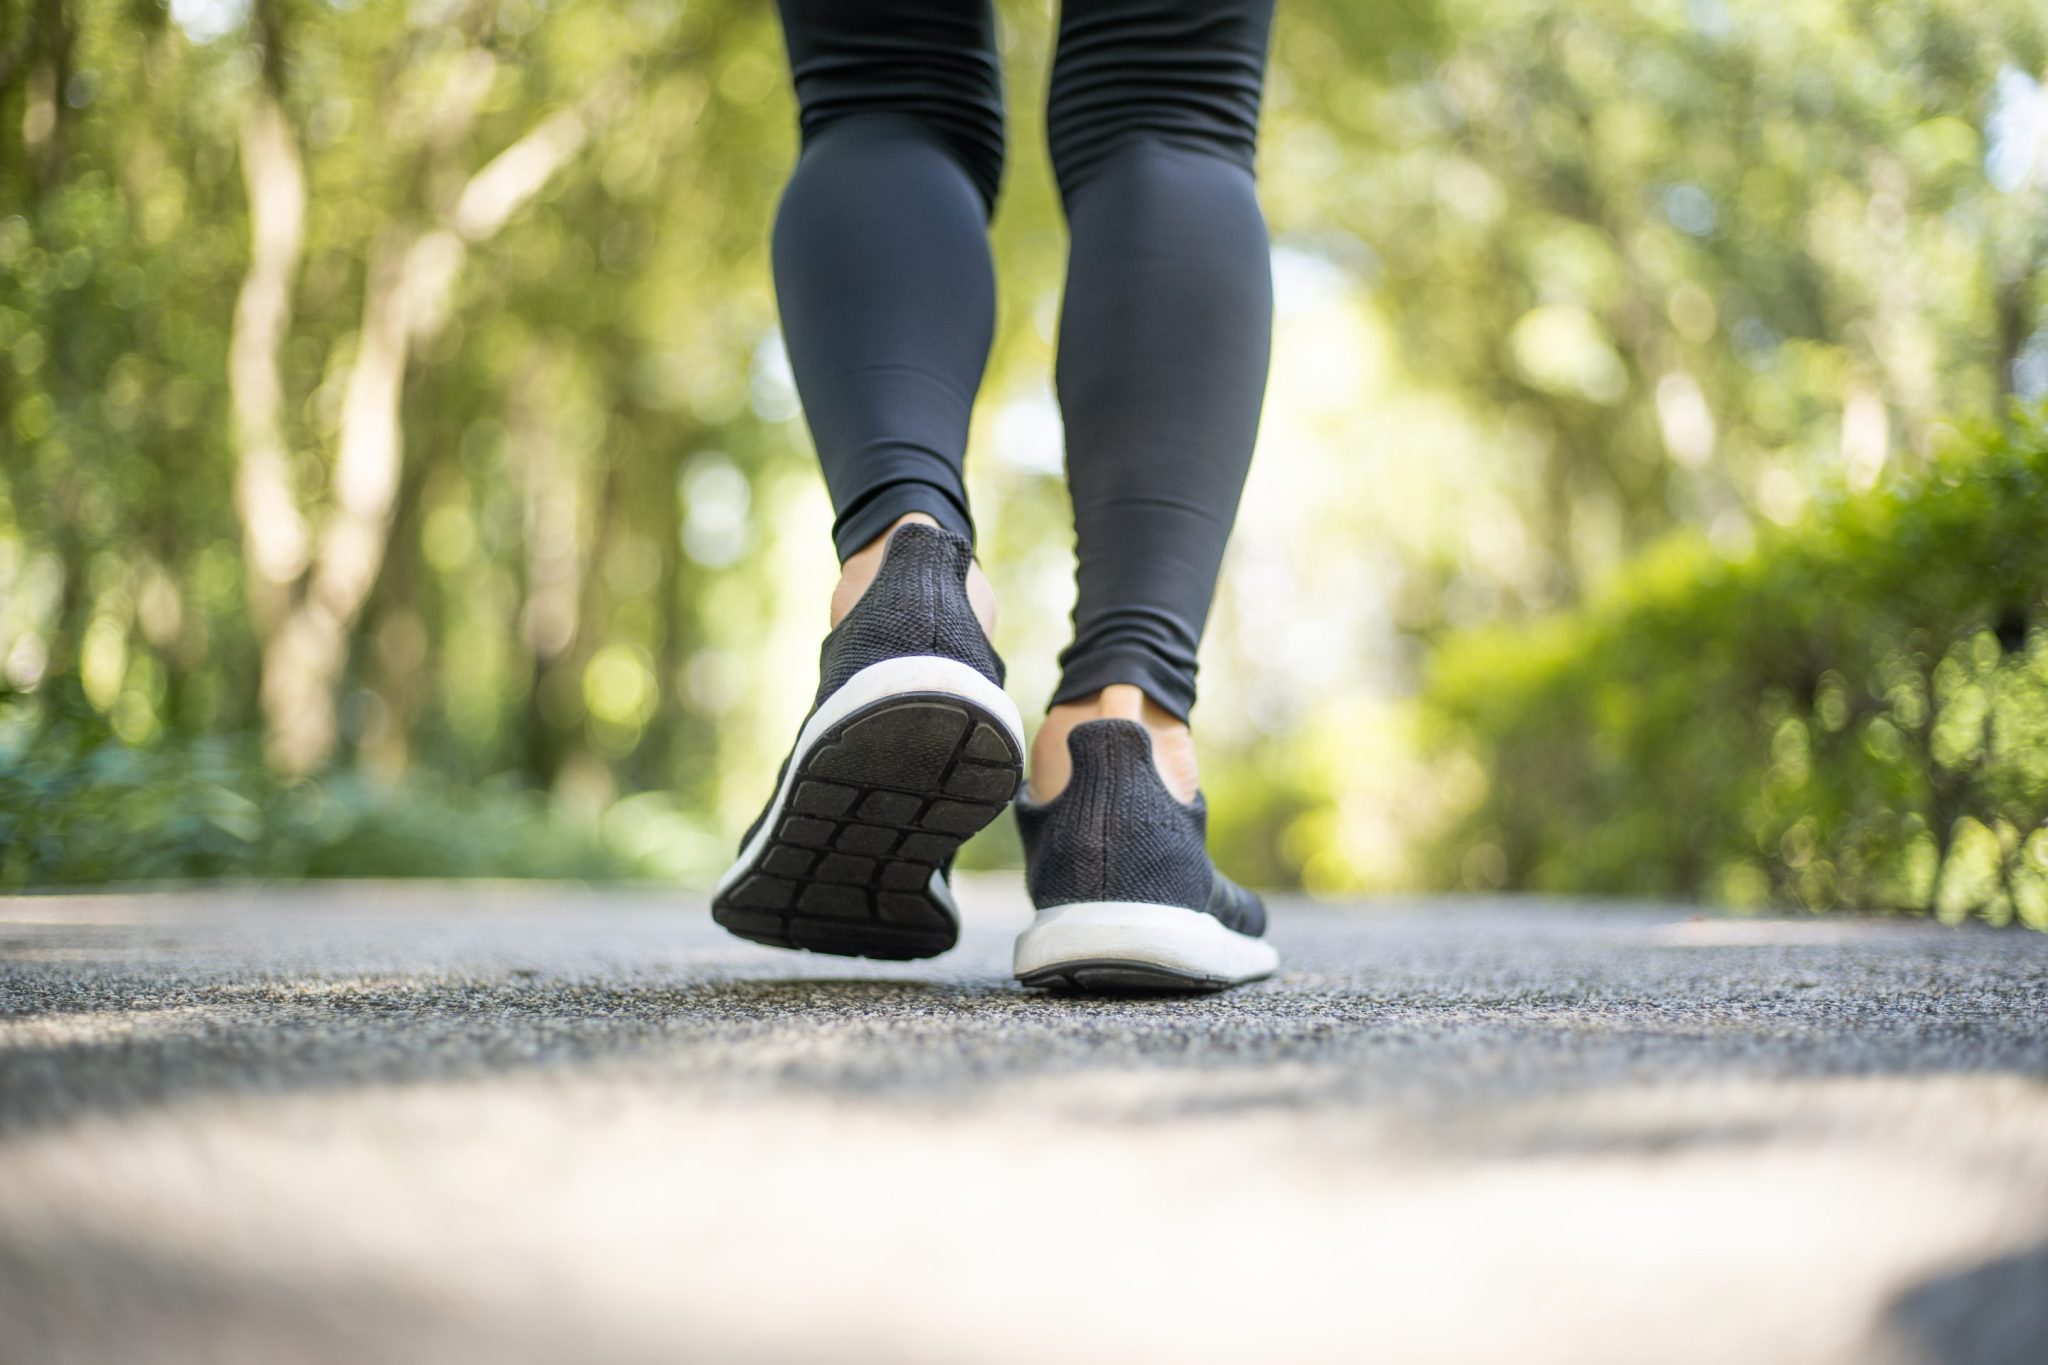 It’s not 10,000 steps a day anymore. A personalized daily step goal can help with weight management